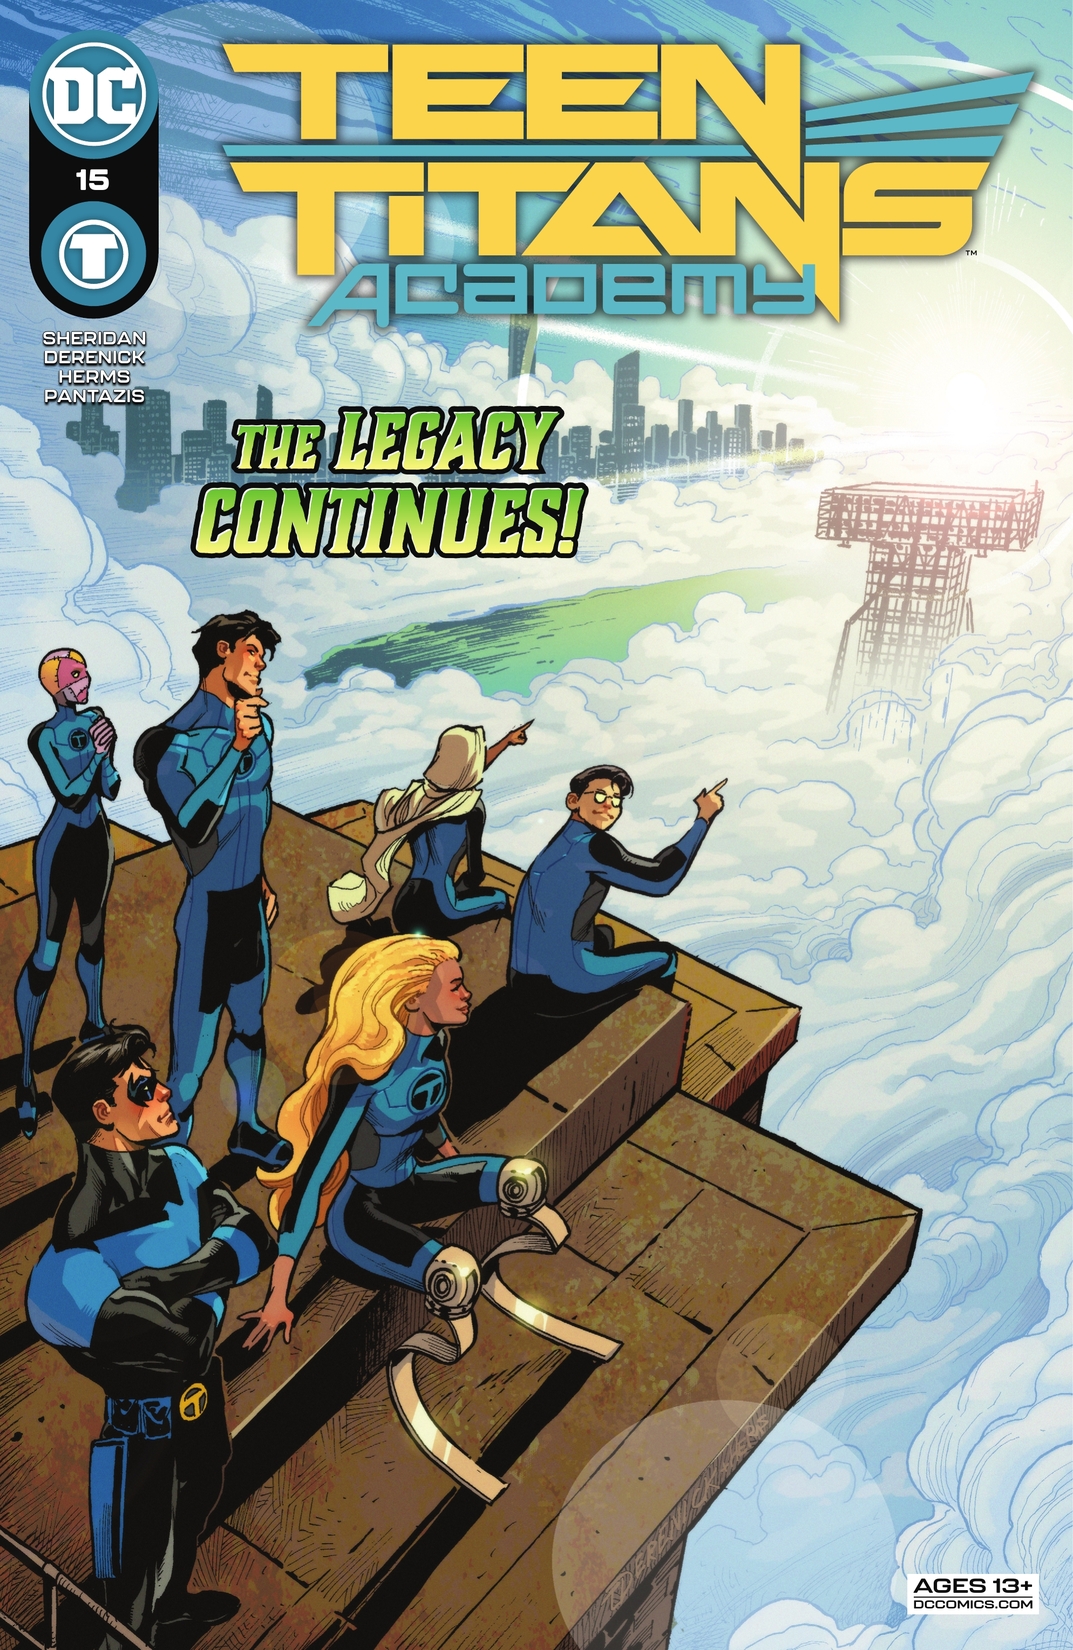 Teen Titans Academy #15 preview images